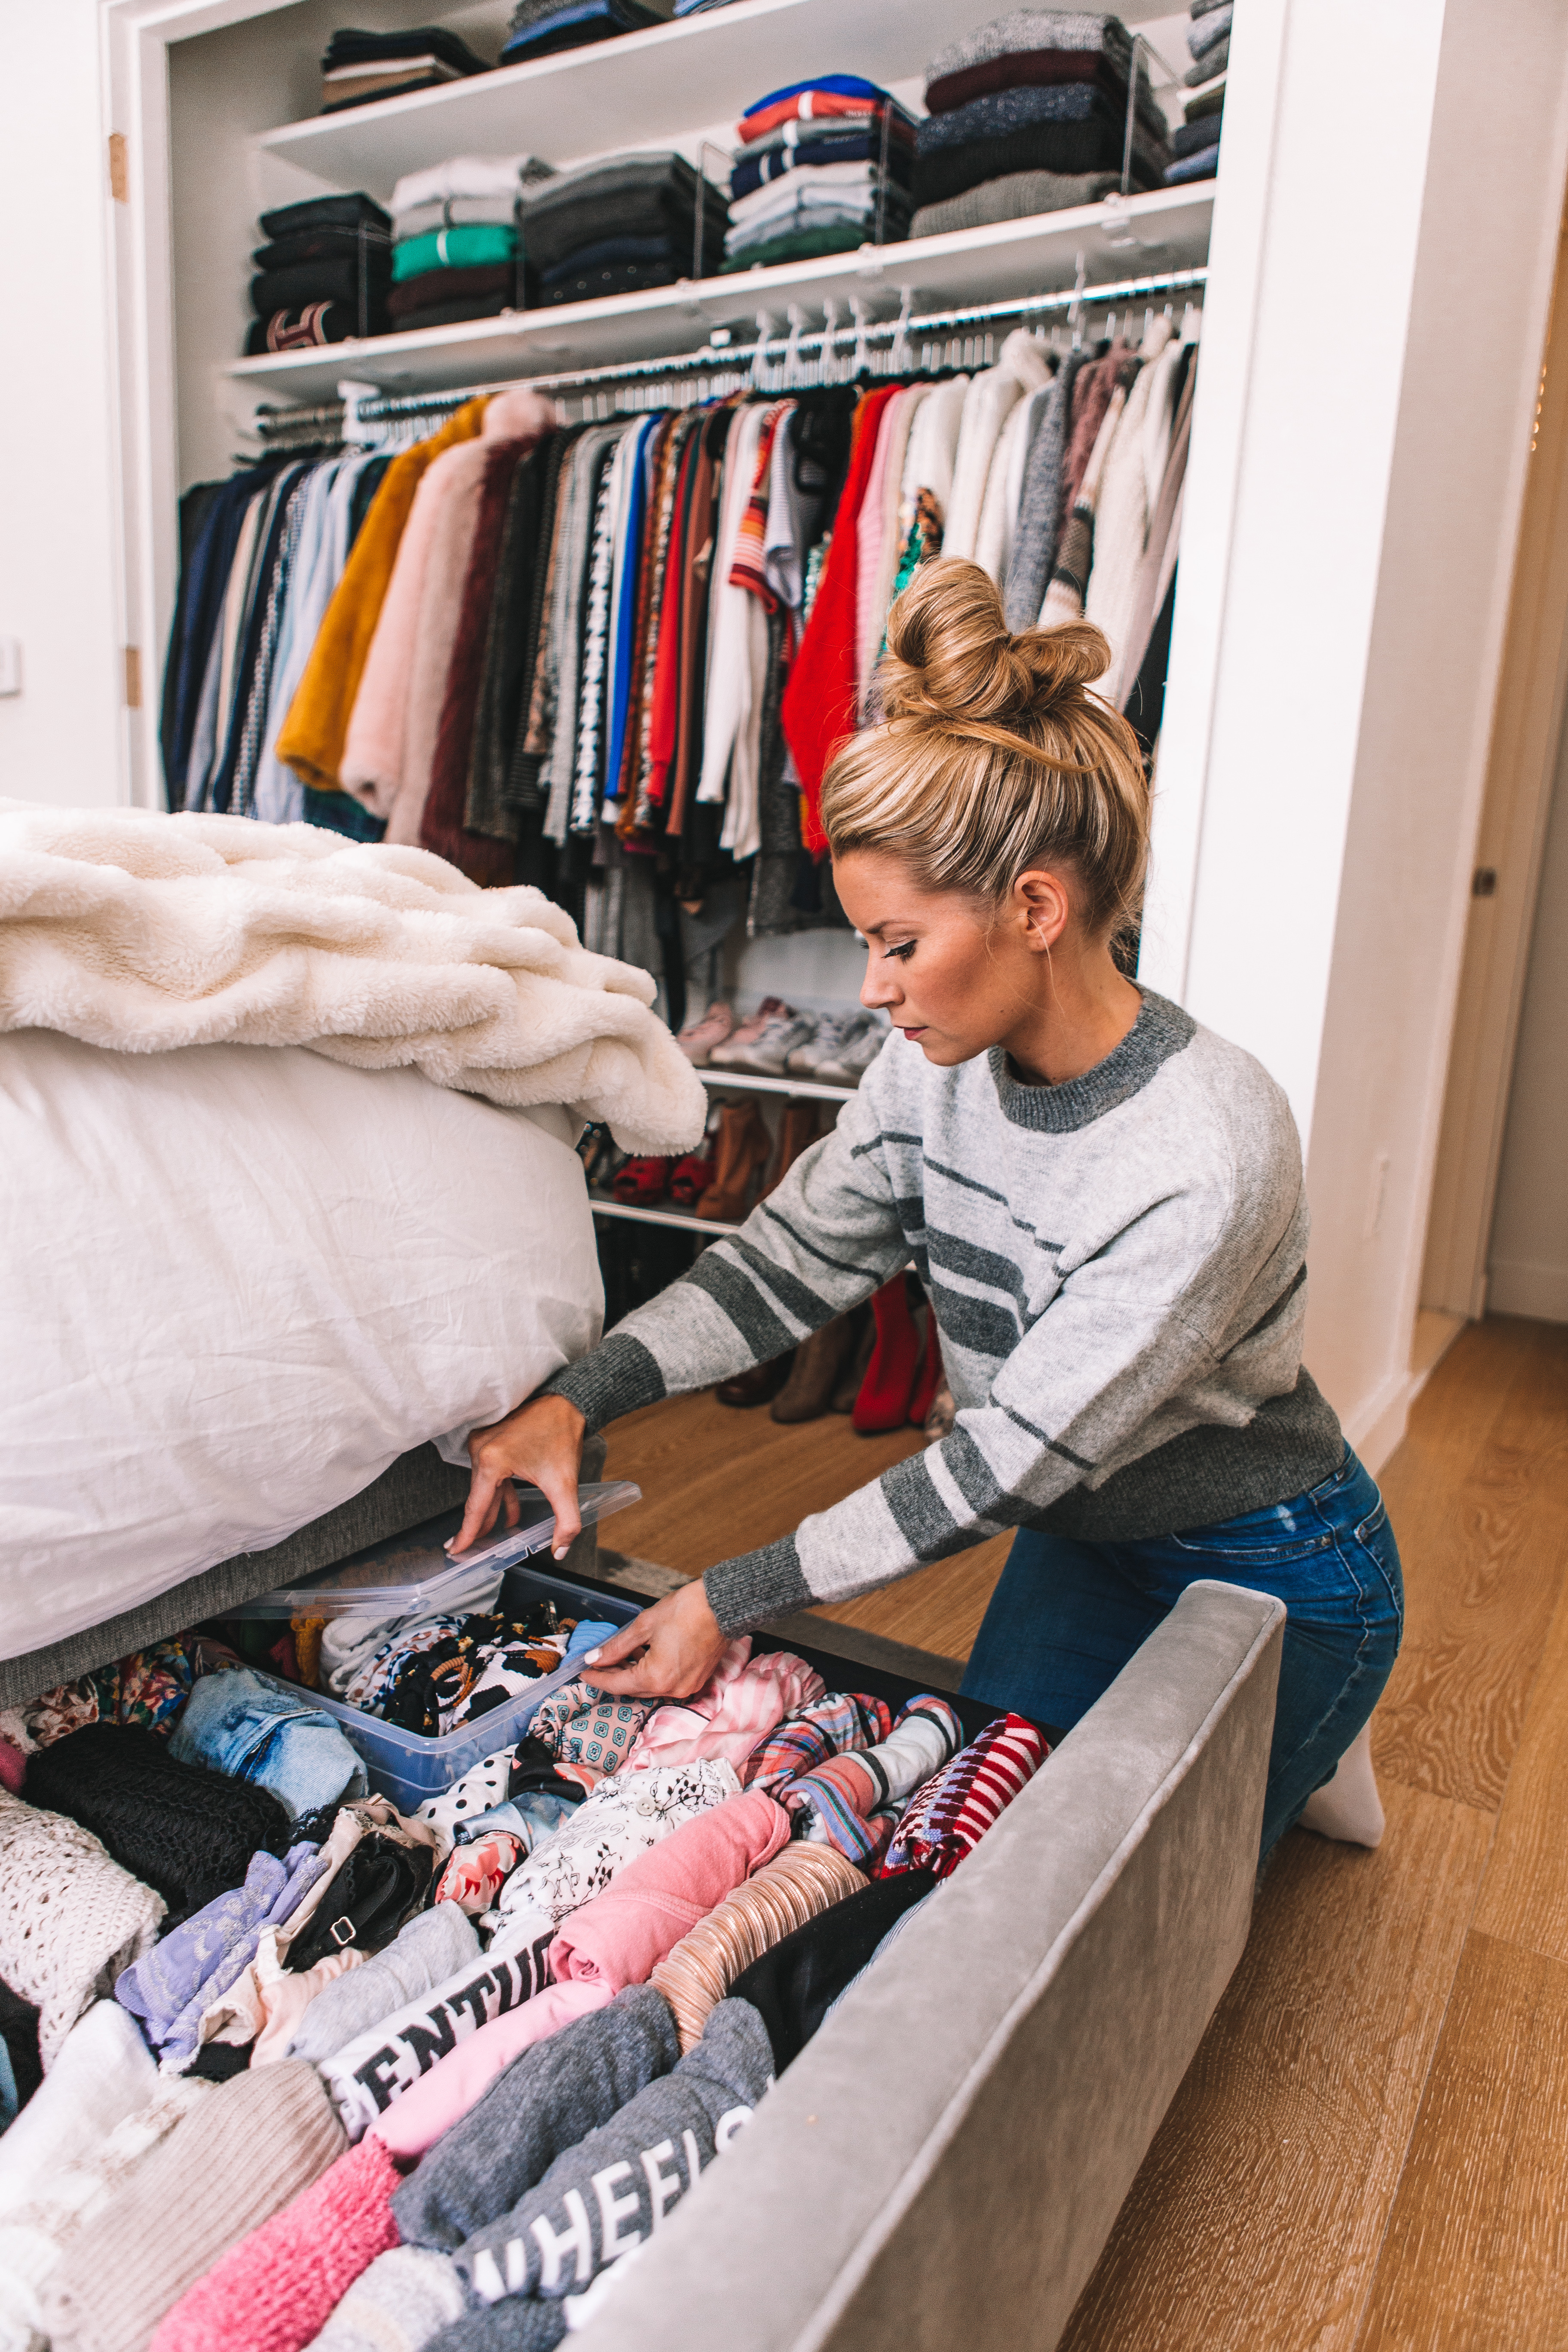 How to organize your small NYC apartment, according to the experts